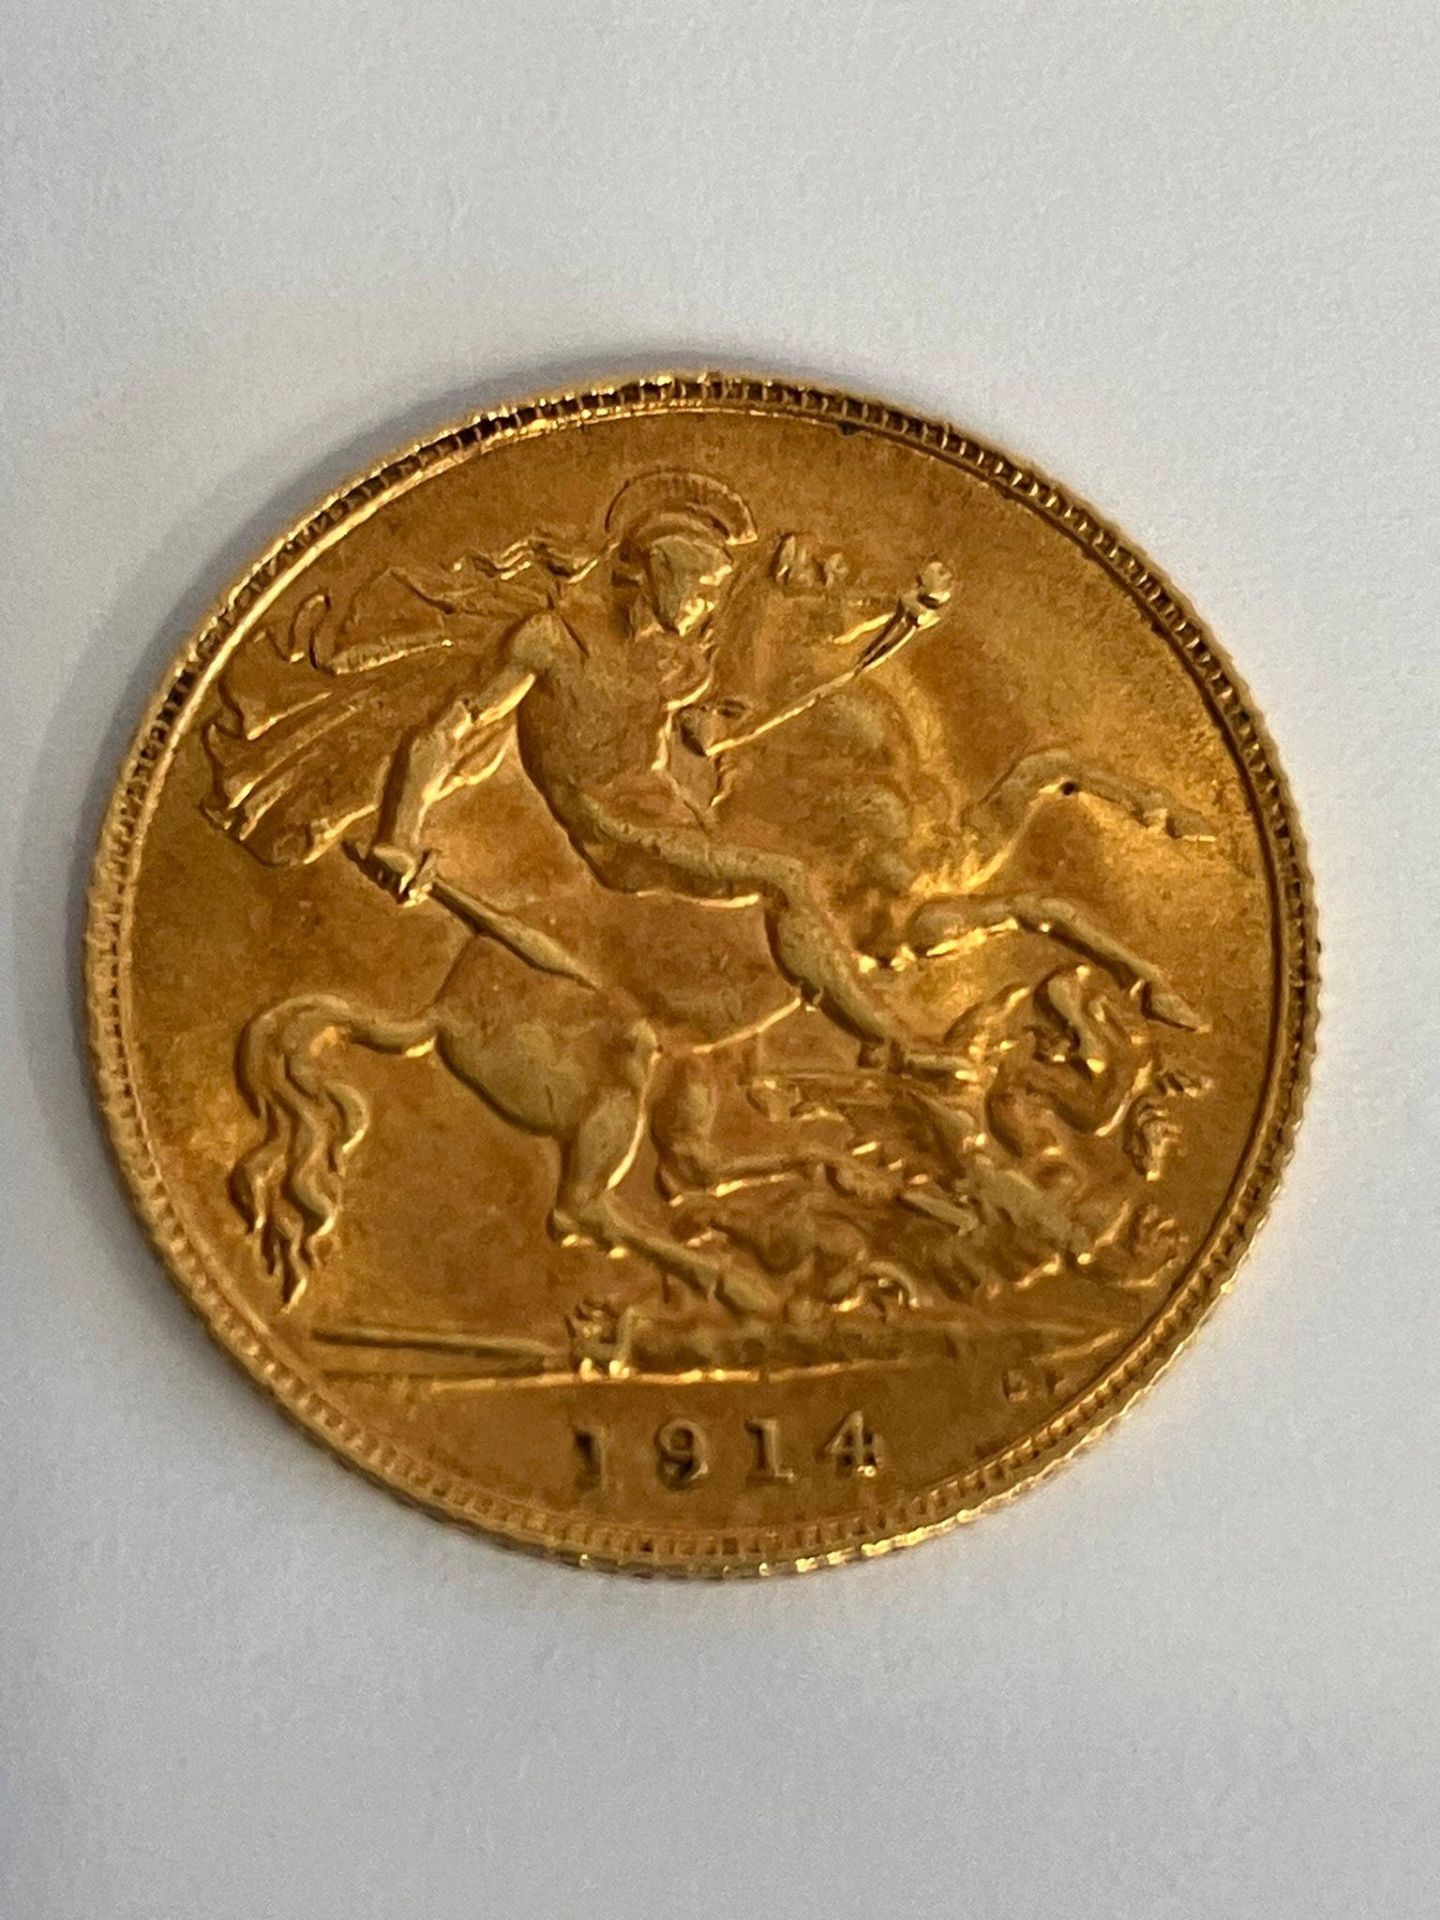 1914 HALF SOVEREIGN. 22 carat Gold. London Mint. Very fine condition. Please see pictures. - Image 2 of 3